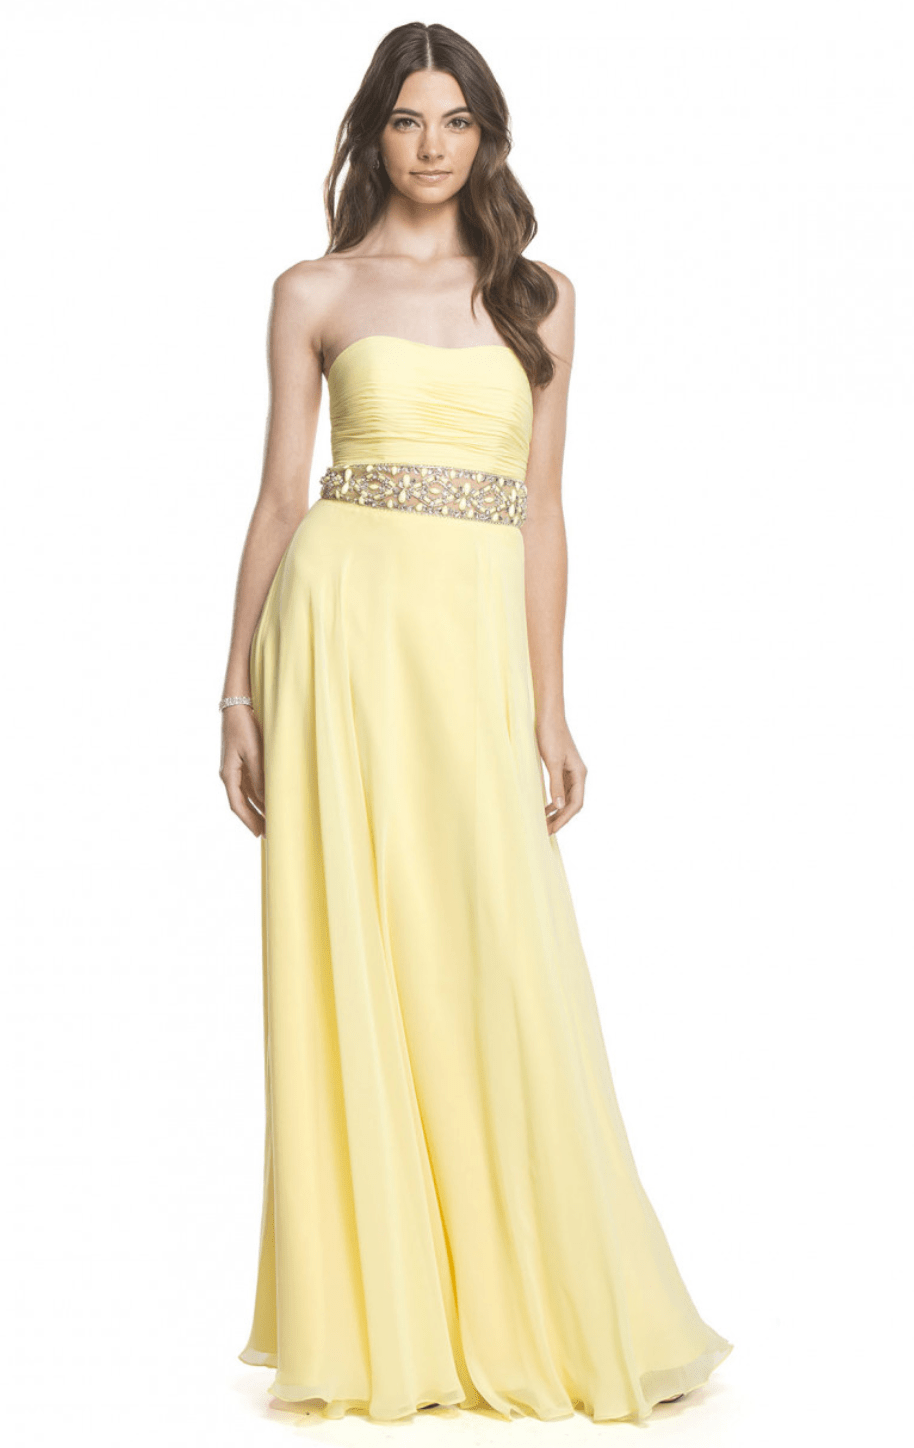 Flowing Chiffon Crystal Beaded Dress by Aspeed - NORMA REED